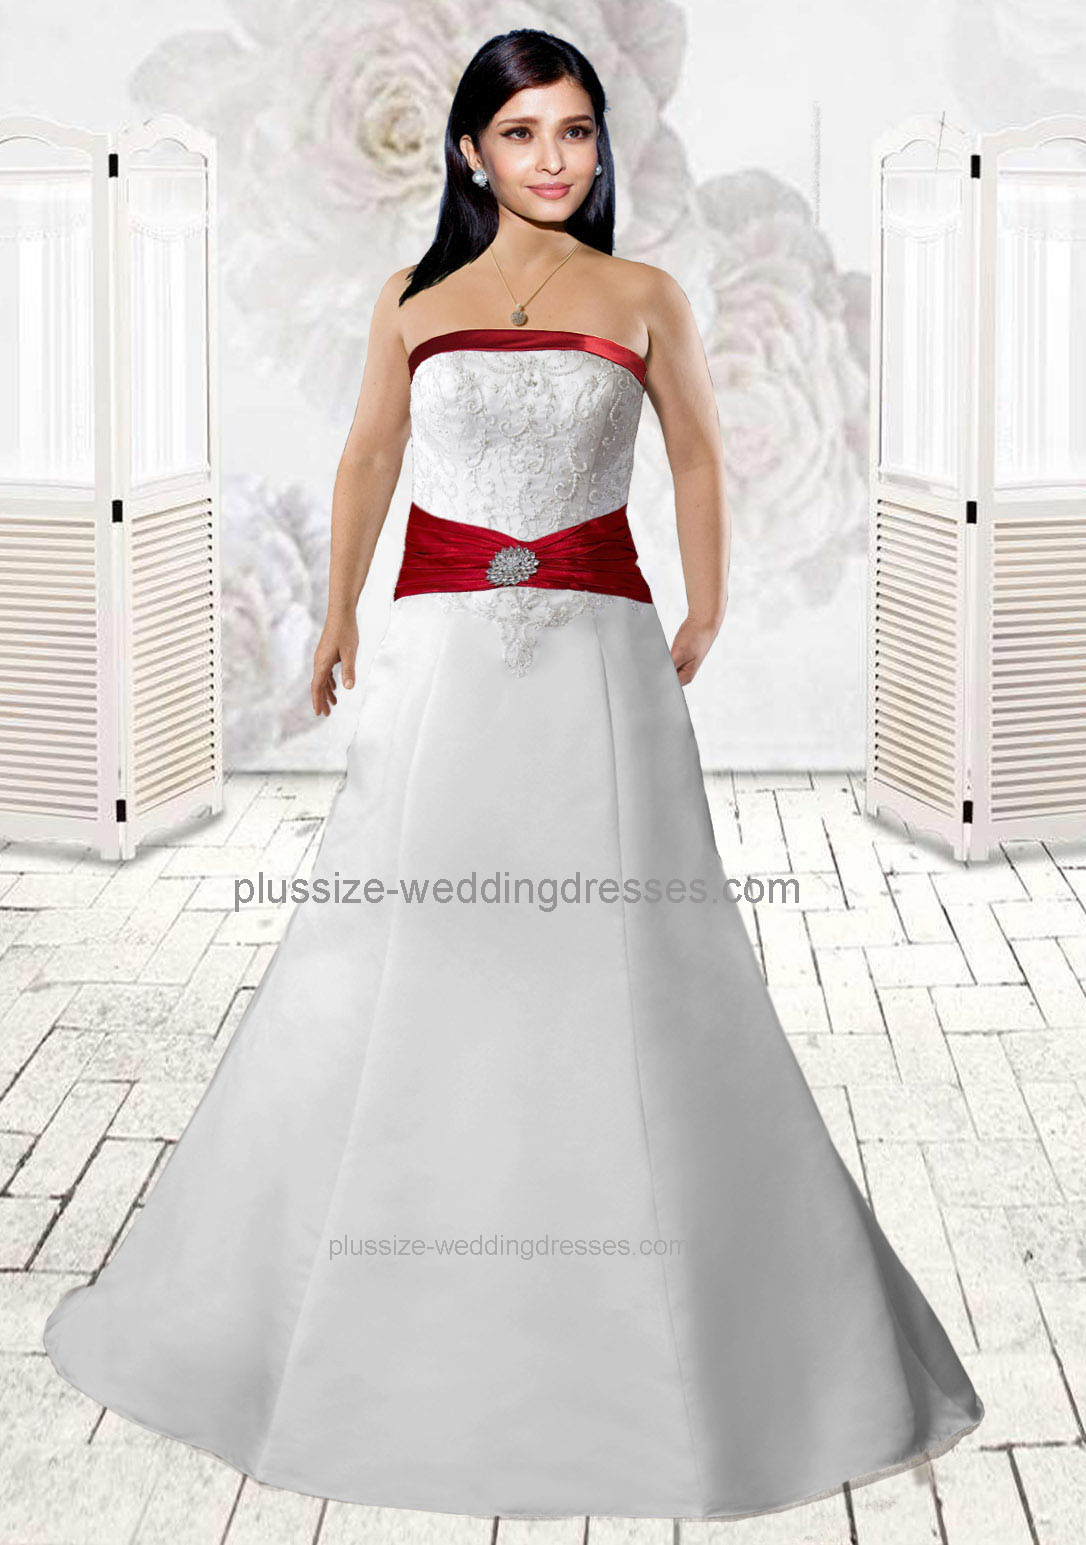 Strapless plus size wedding dresses with color